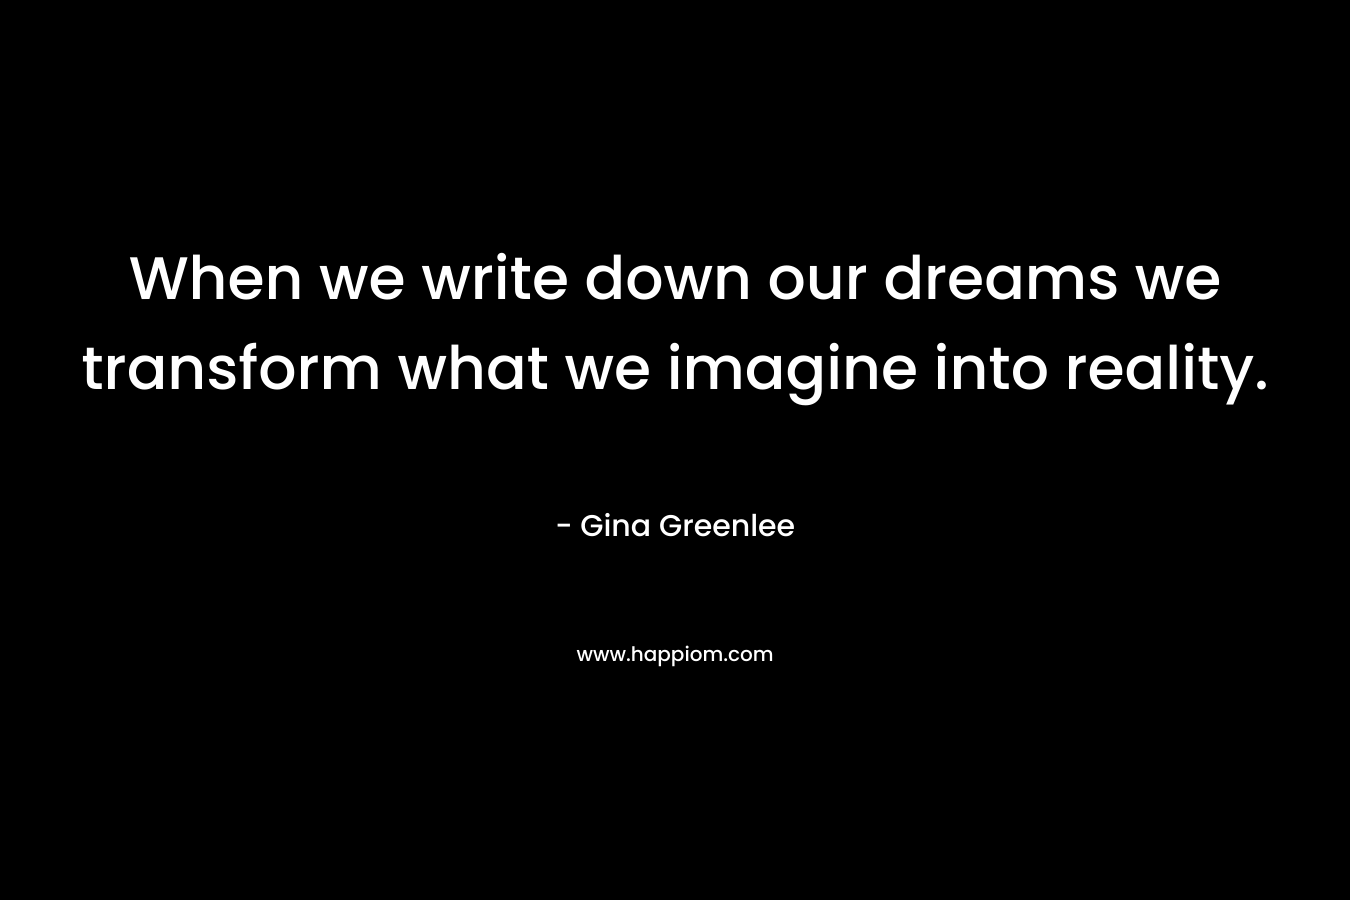 When we write down our dreams we transform what we imagine into reality. – Gina Greenlee